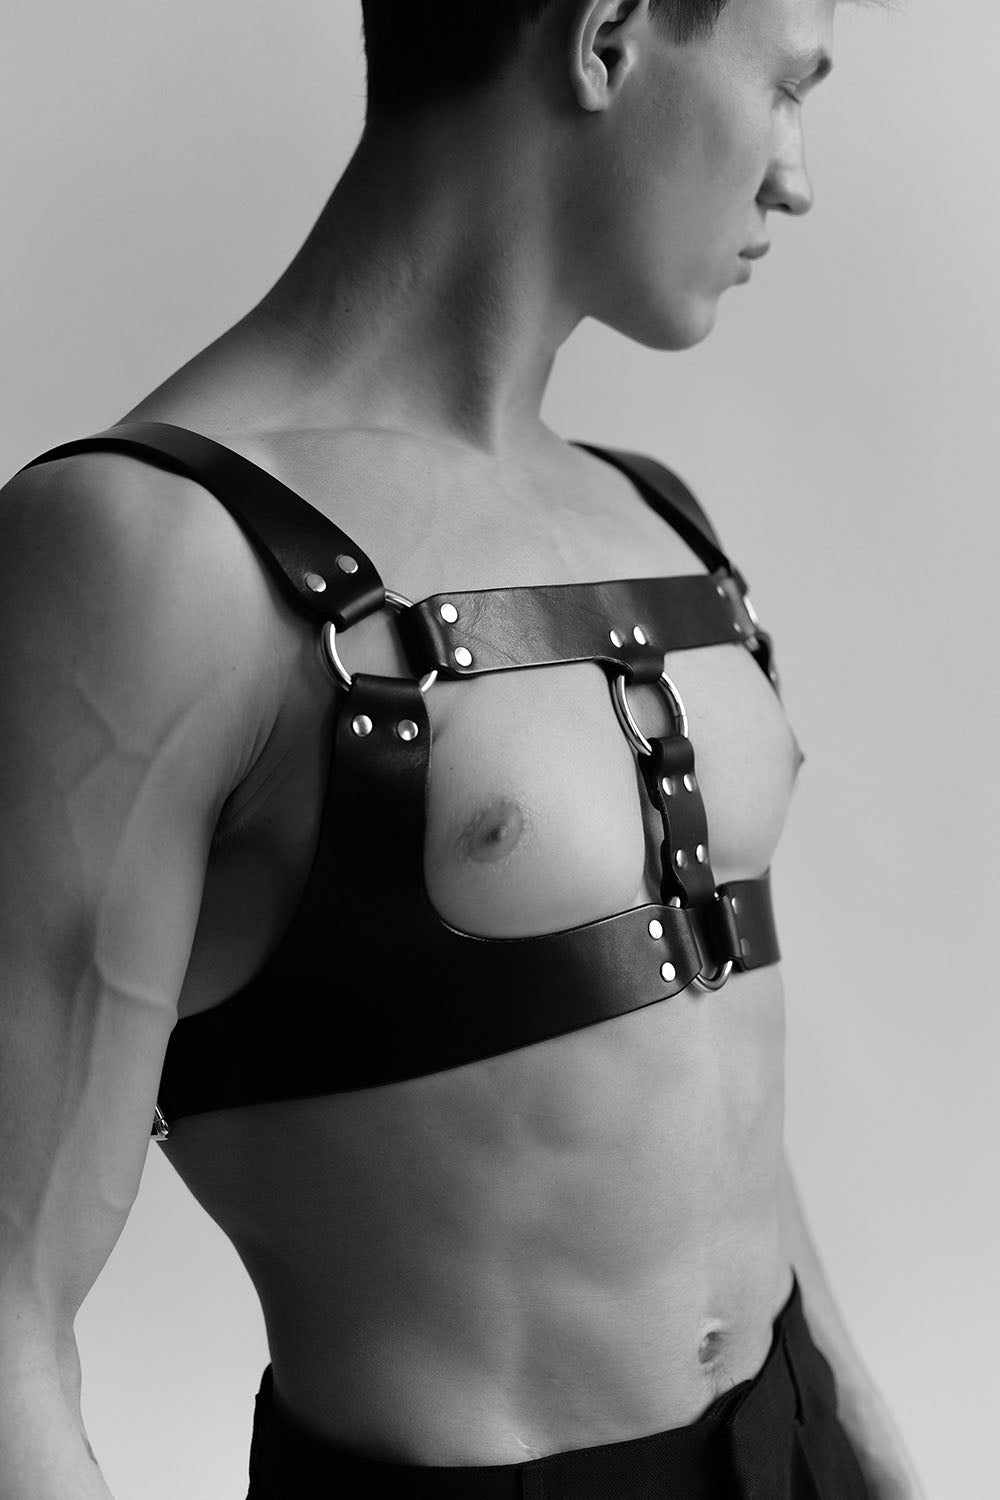 Anoeses leather gay harness in black color